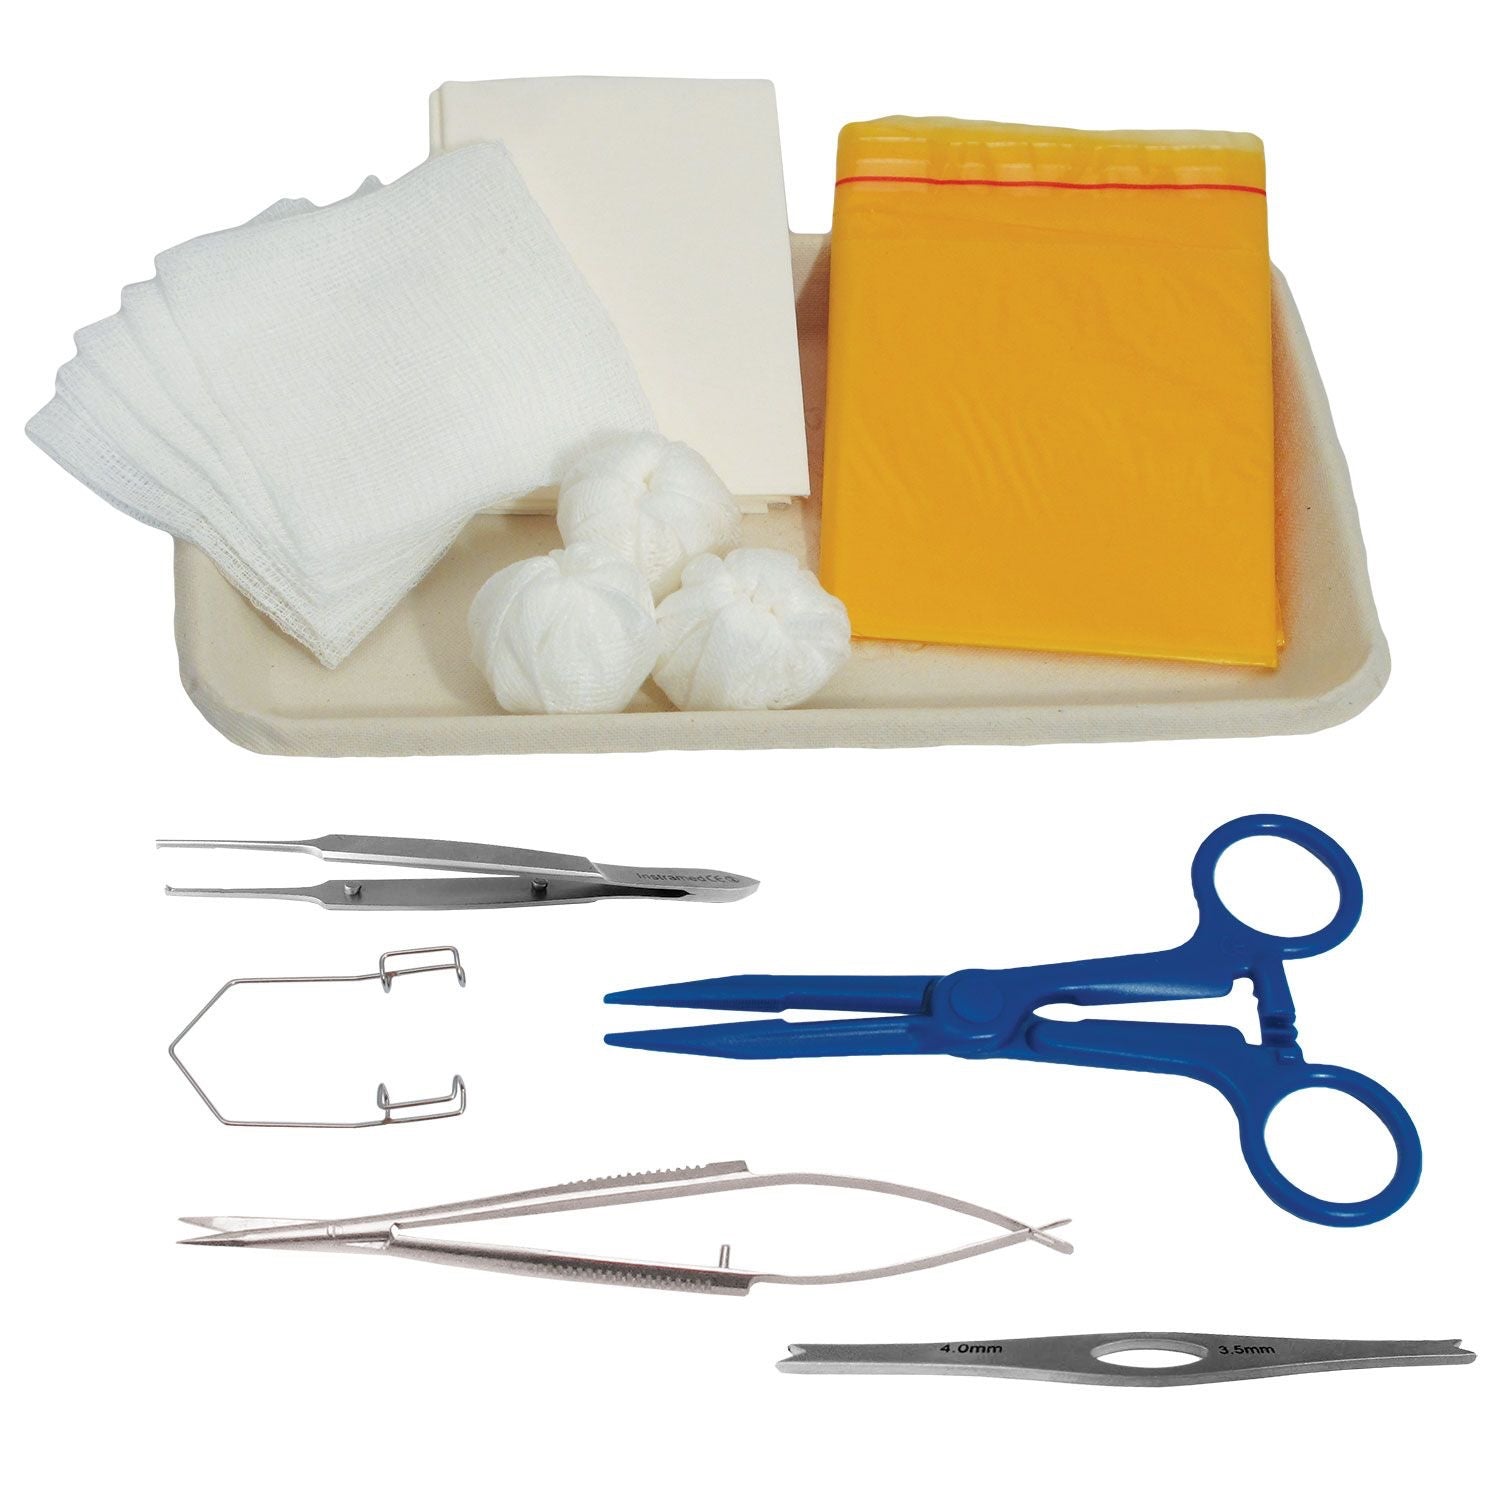 Instramed Intravitreal Injection Procedure Pack